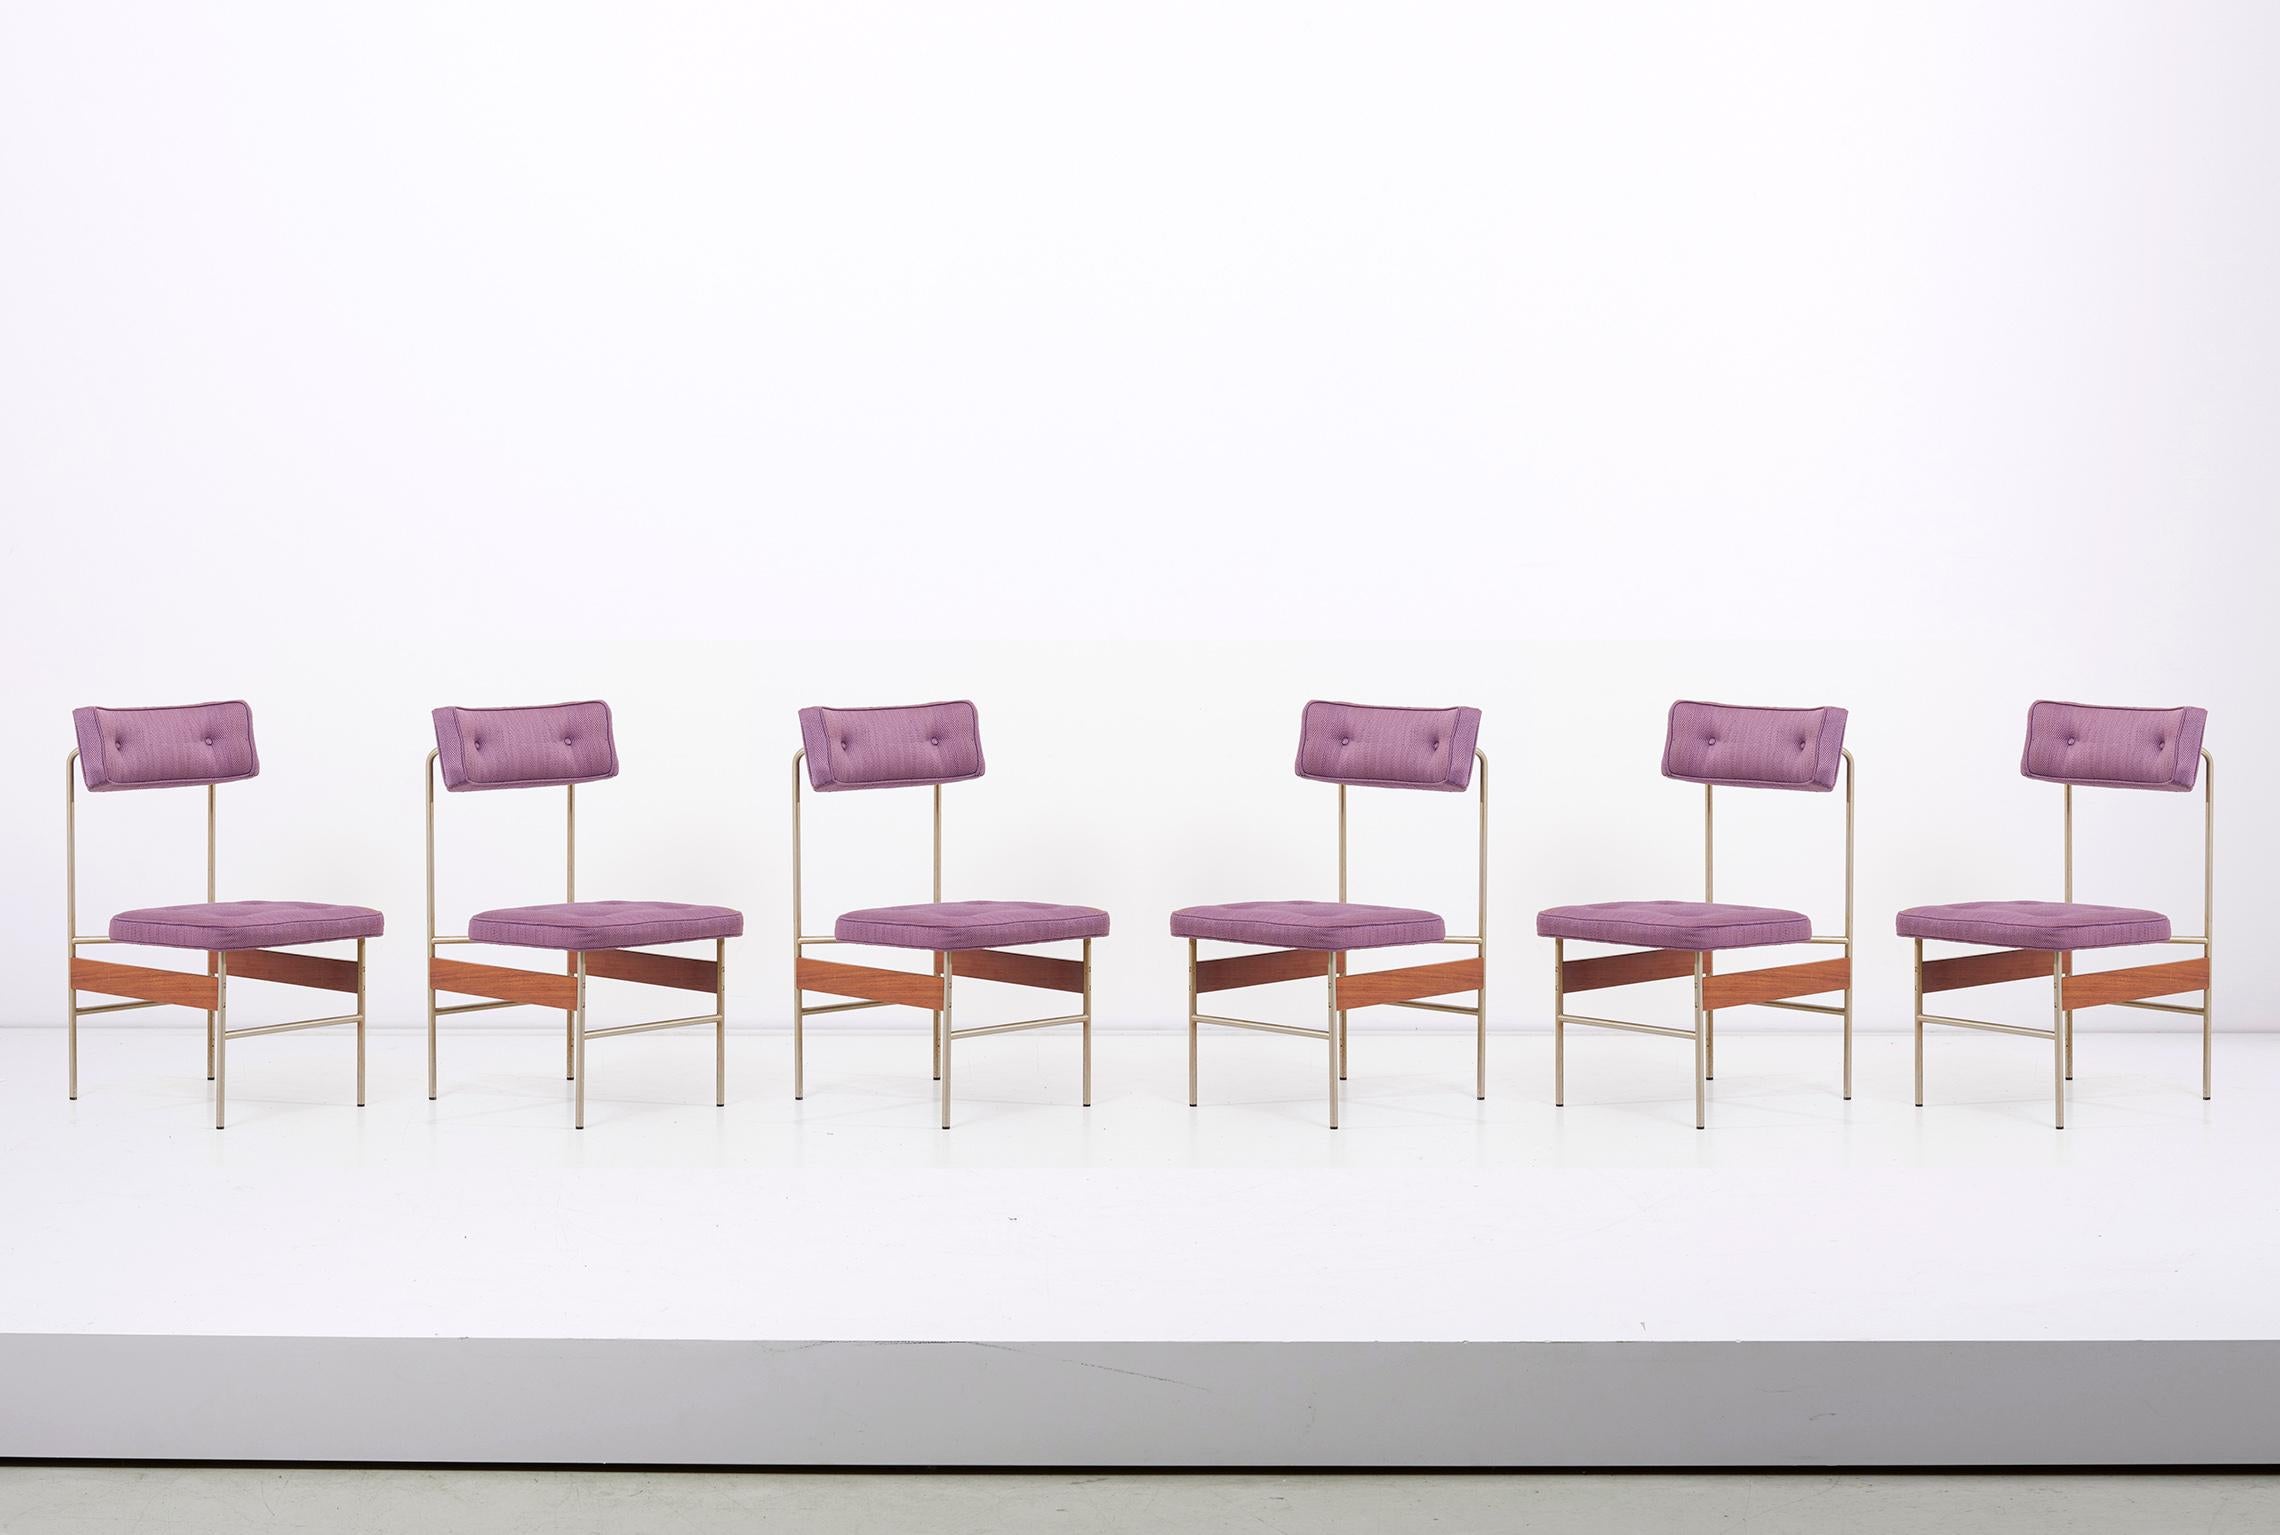 Set of 12 upholstered dining chairs, Italy, 1960s
This set is in original purple fabric. The frame is made of metal and wood. Very comfortable chair.